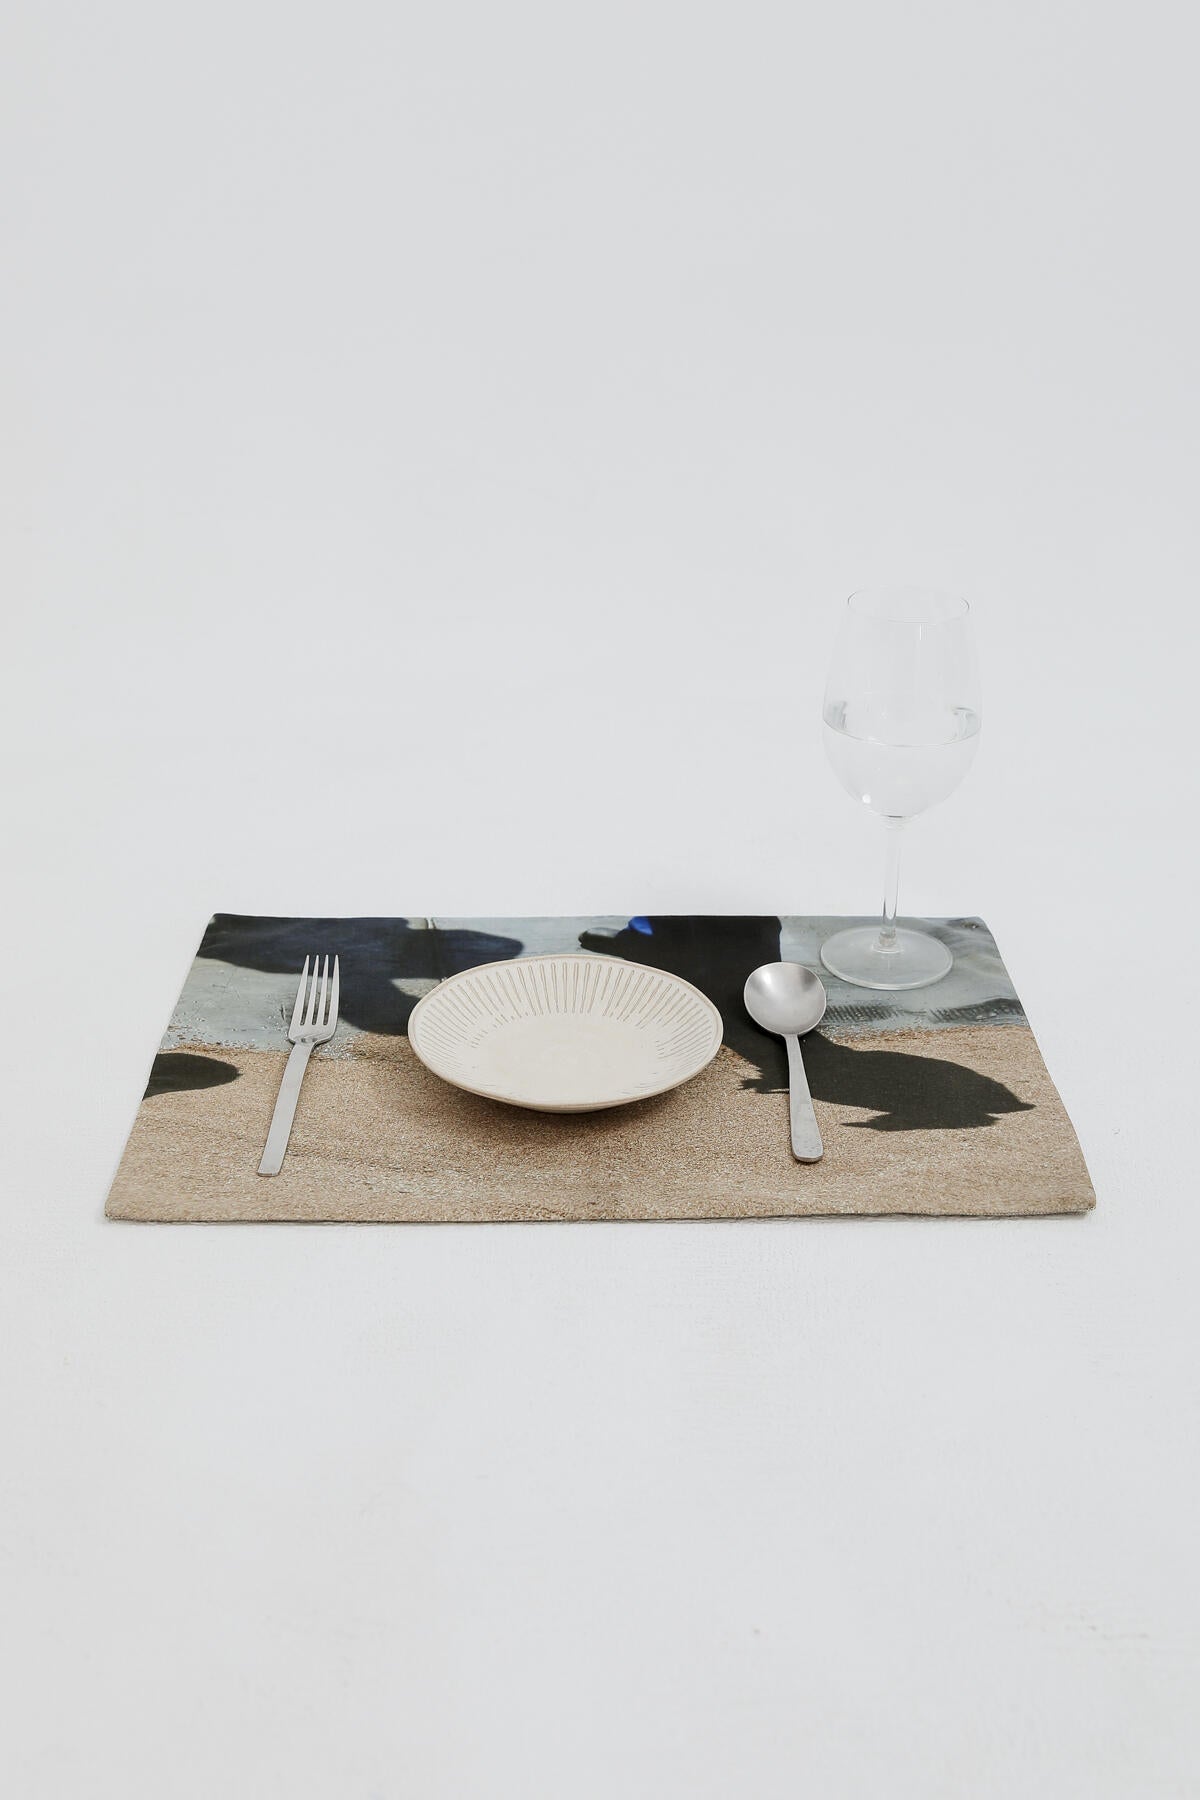 B213_Dry Cargo Placemat_L_01